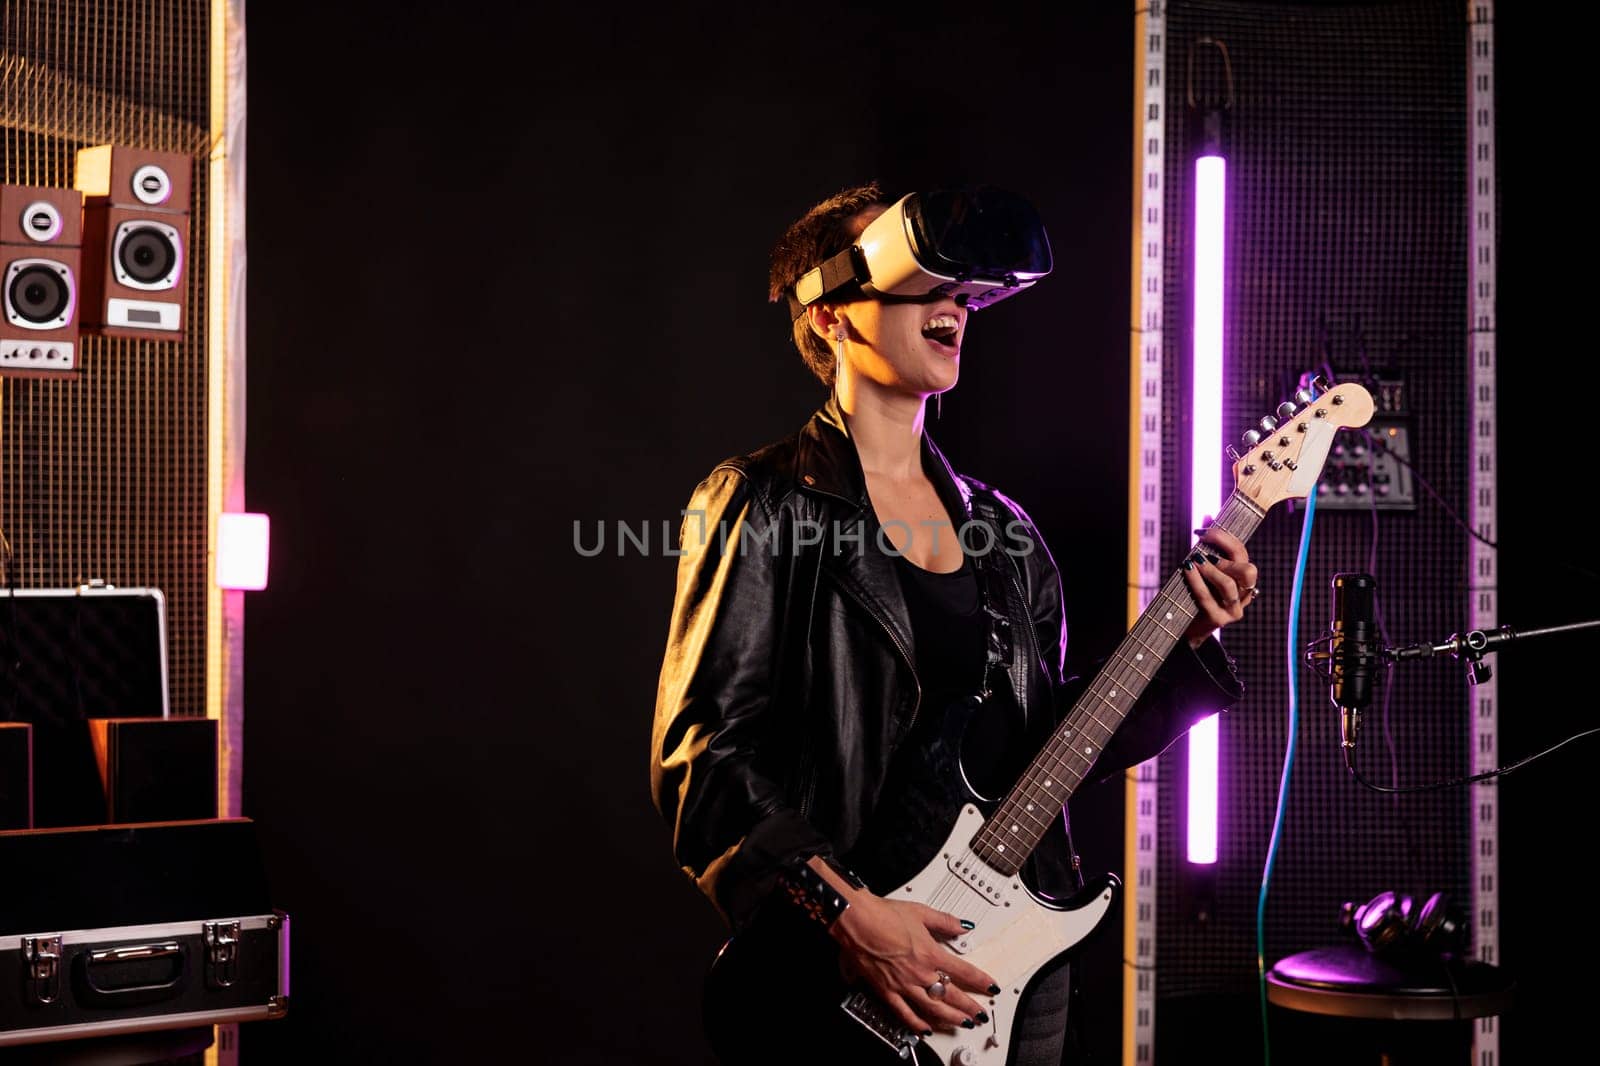 Rockstar with vr goggles enjoying rock concert simulation while playing heavy metal song at electric guitar in music studio. Woman musician performing grunge album using electricinstrument